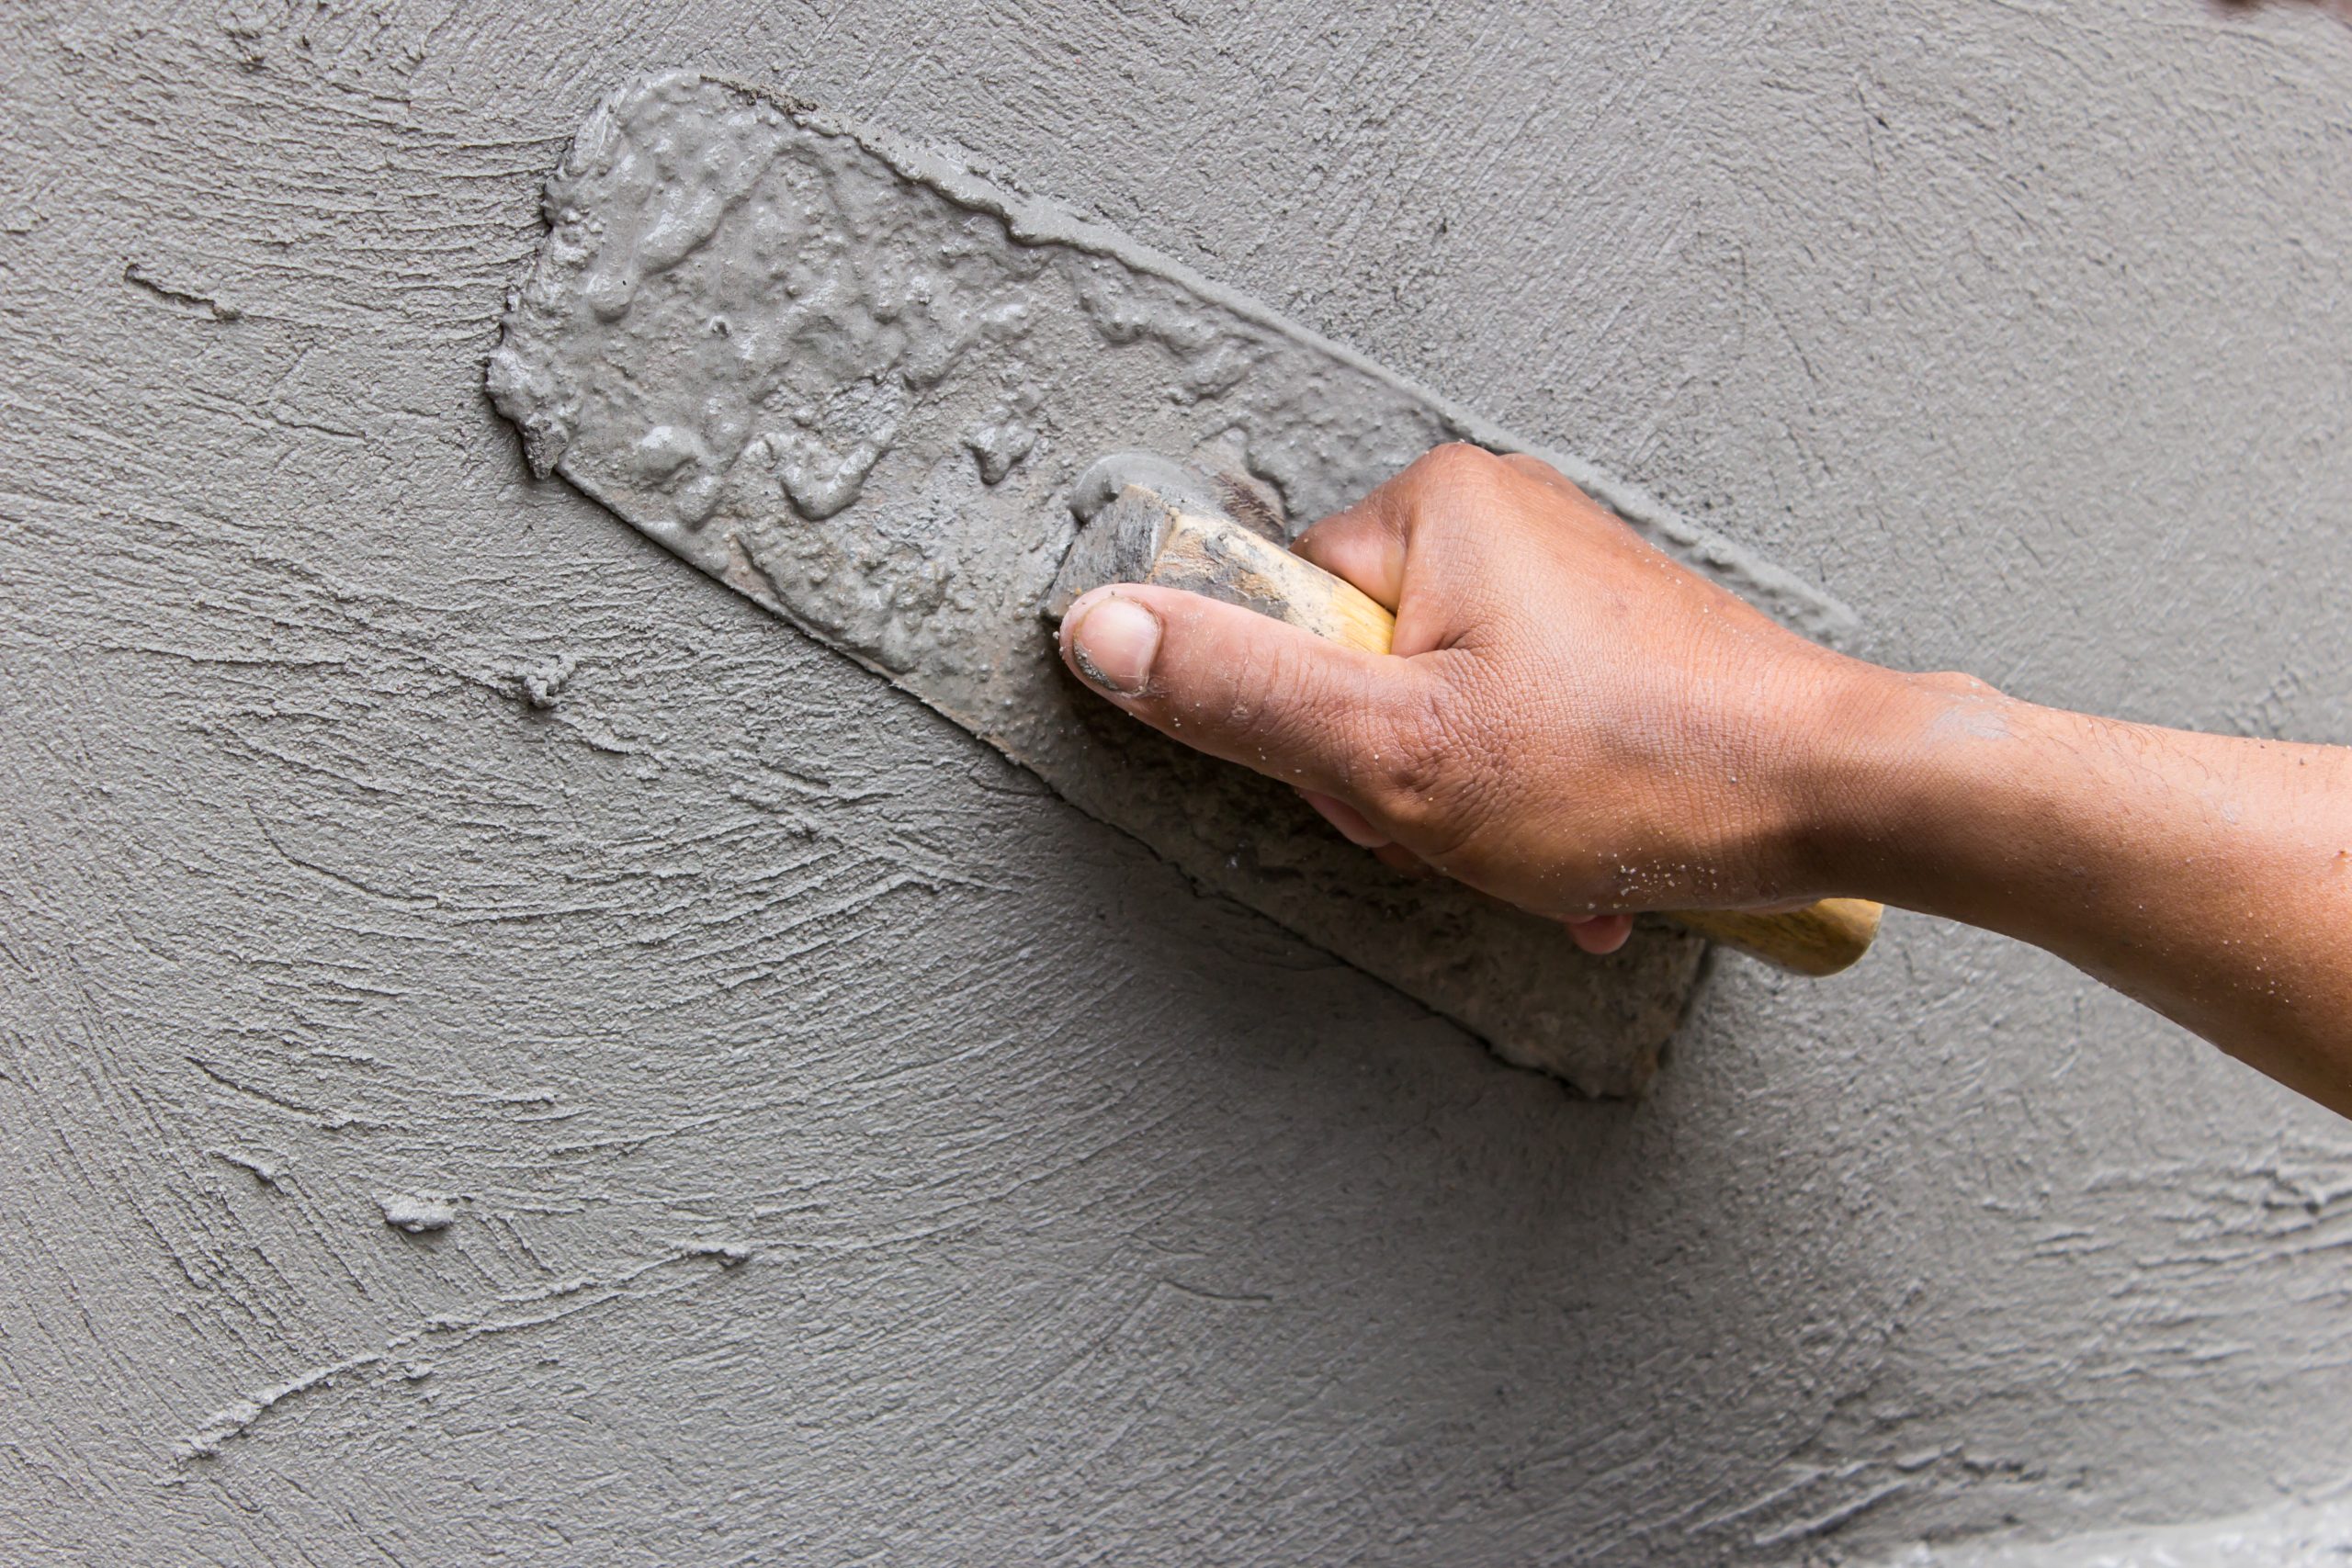 How to Mix Plaster - Step by Step Guide